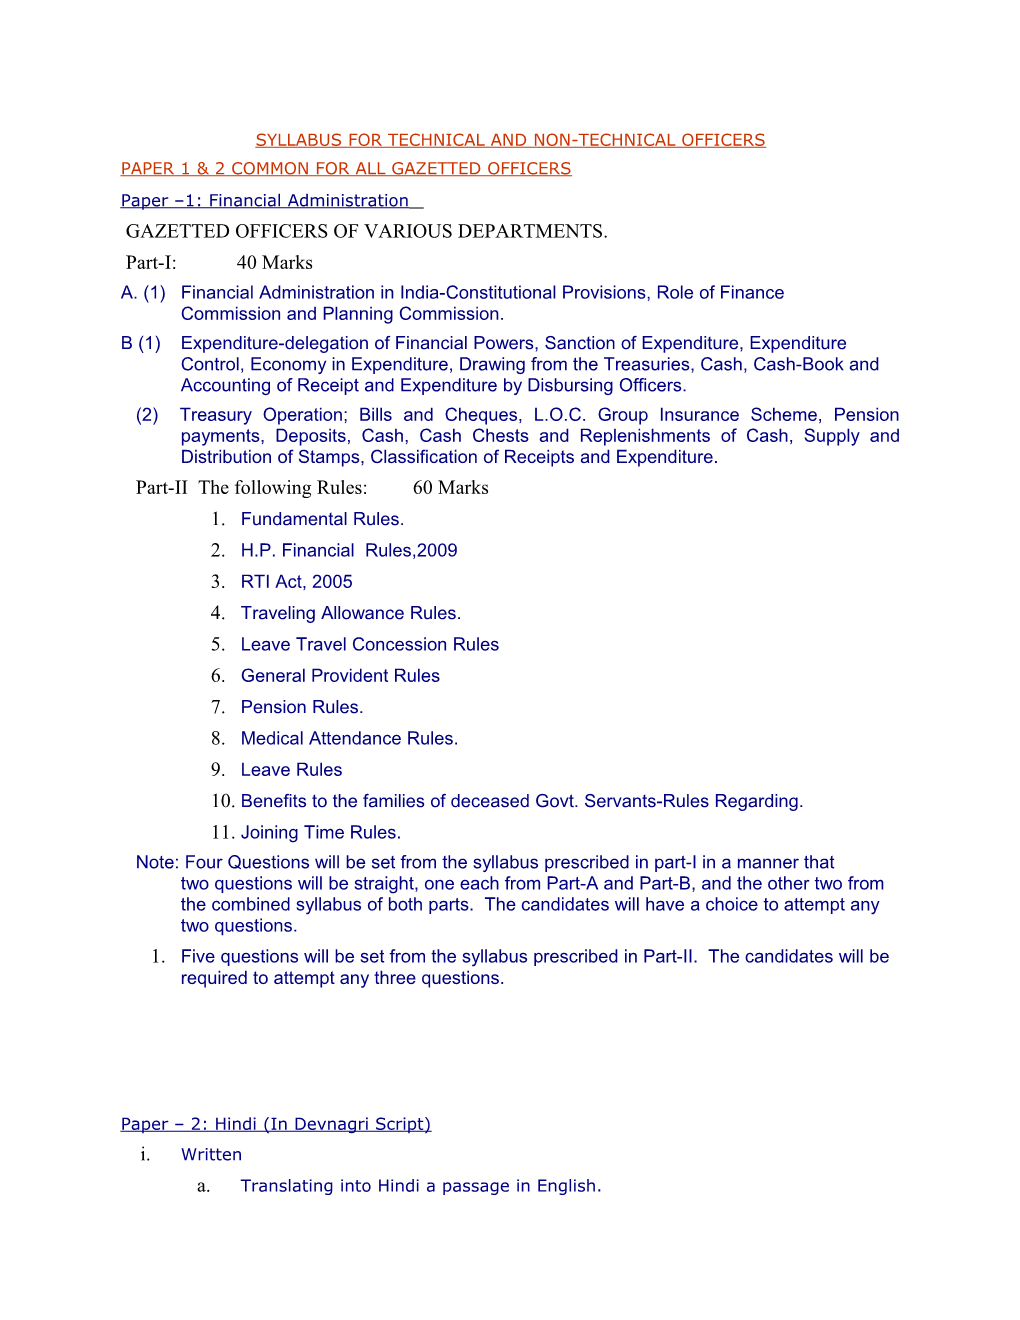 Syllabus for Technical and Non-Technical Officers